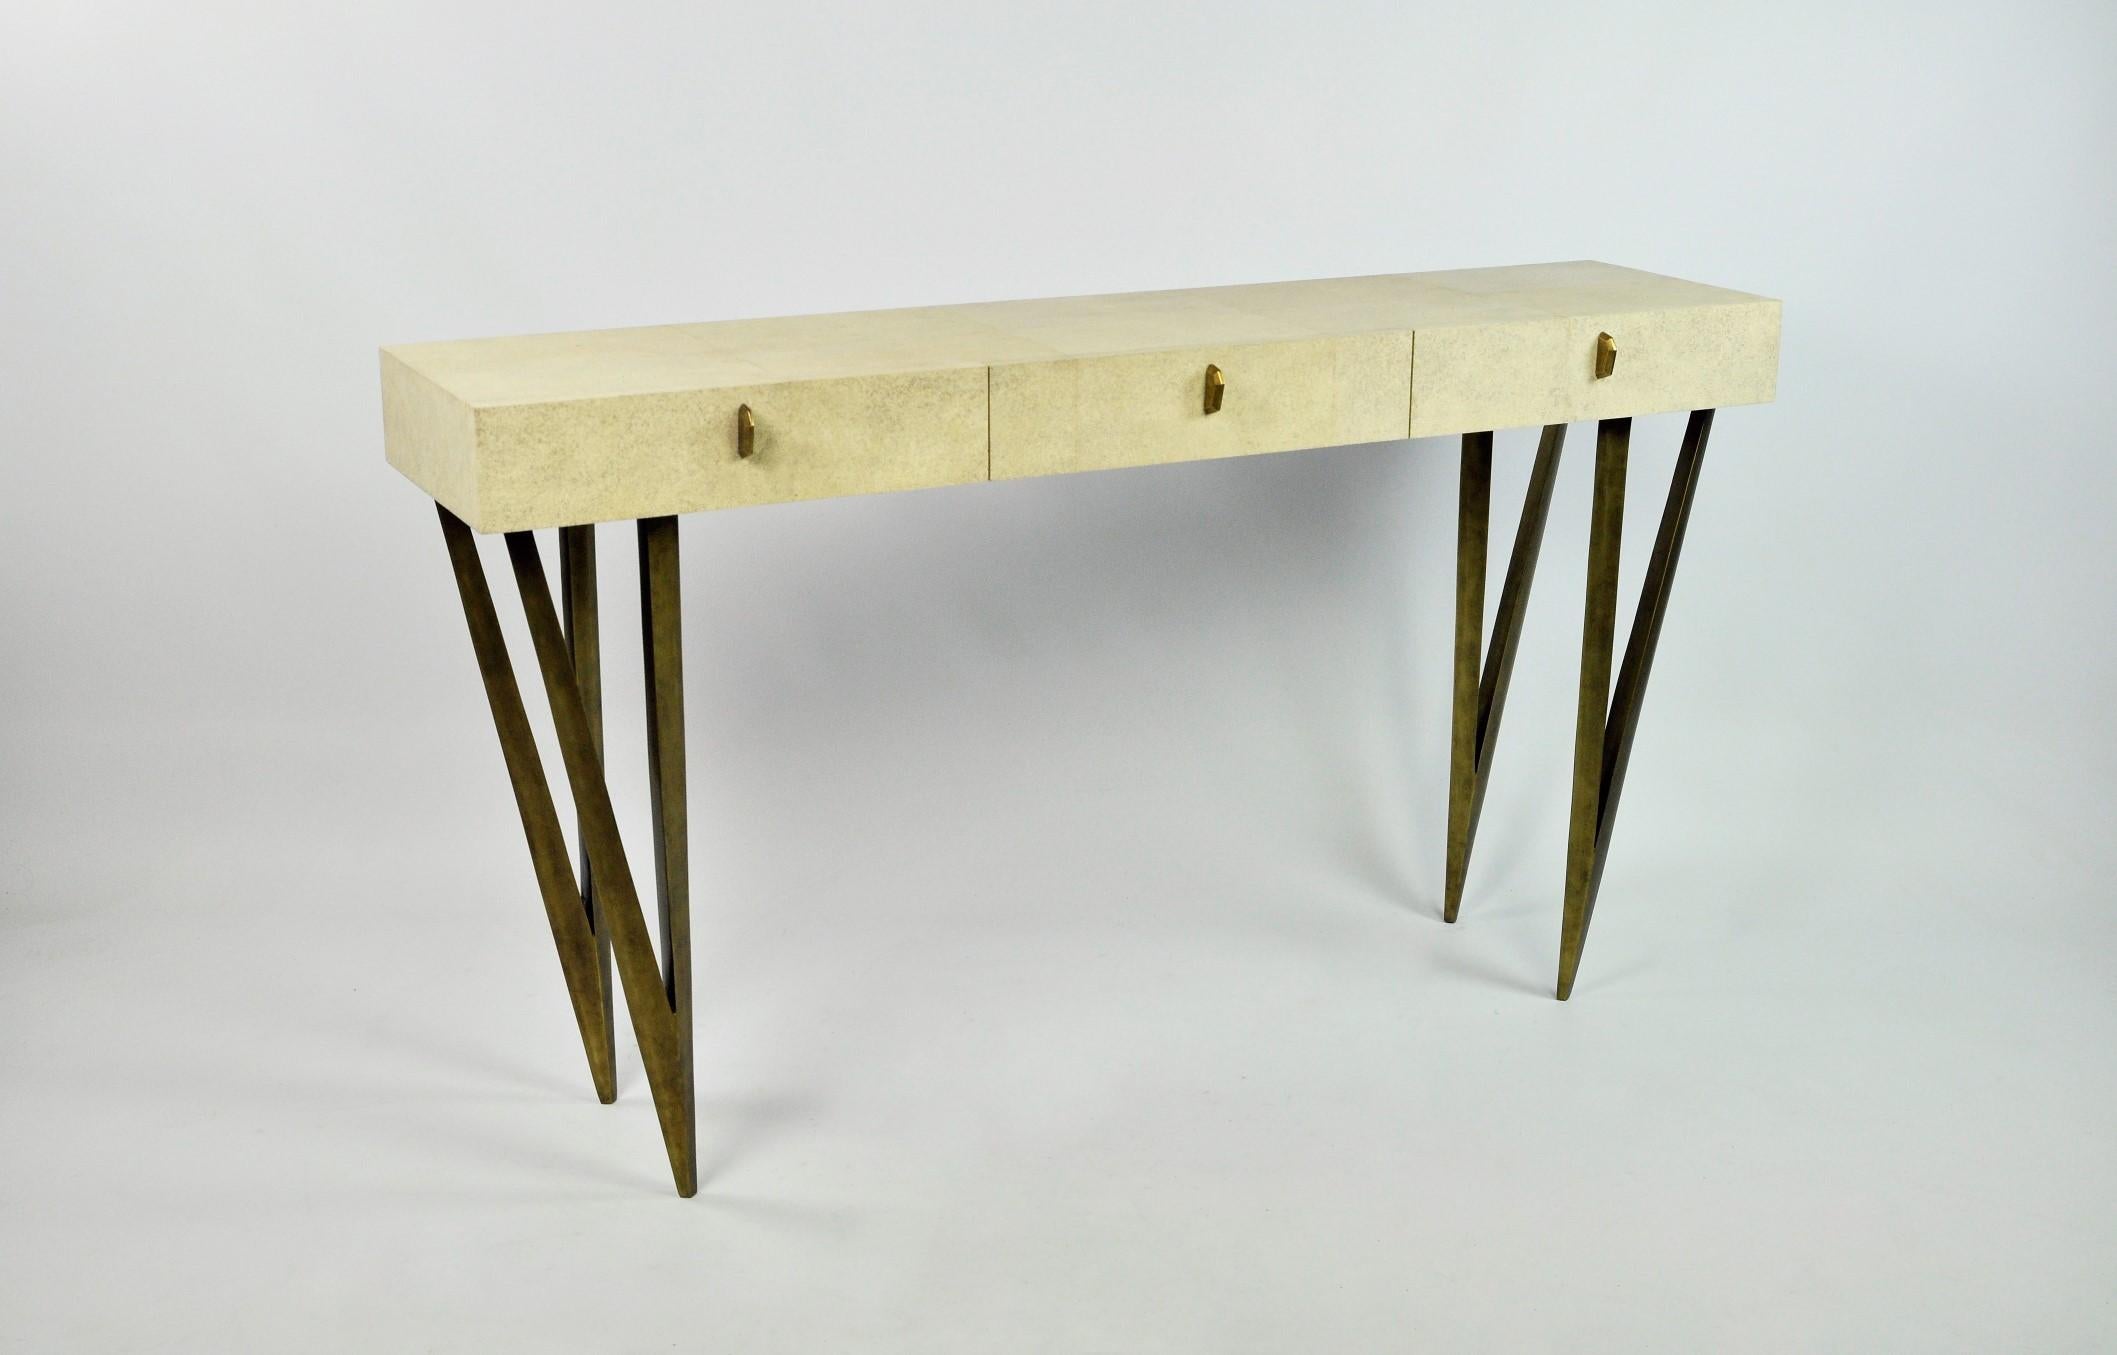 The console table REEF is made of natural shagreen (our ref ANTIC).
It has three drawers and the legs have an old brass patina.
The knobs are made in lost wax cast brass.

This console will settle very well in your entrance or your living room.